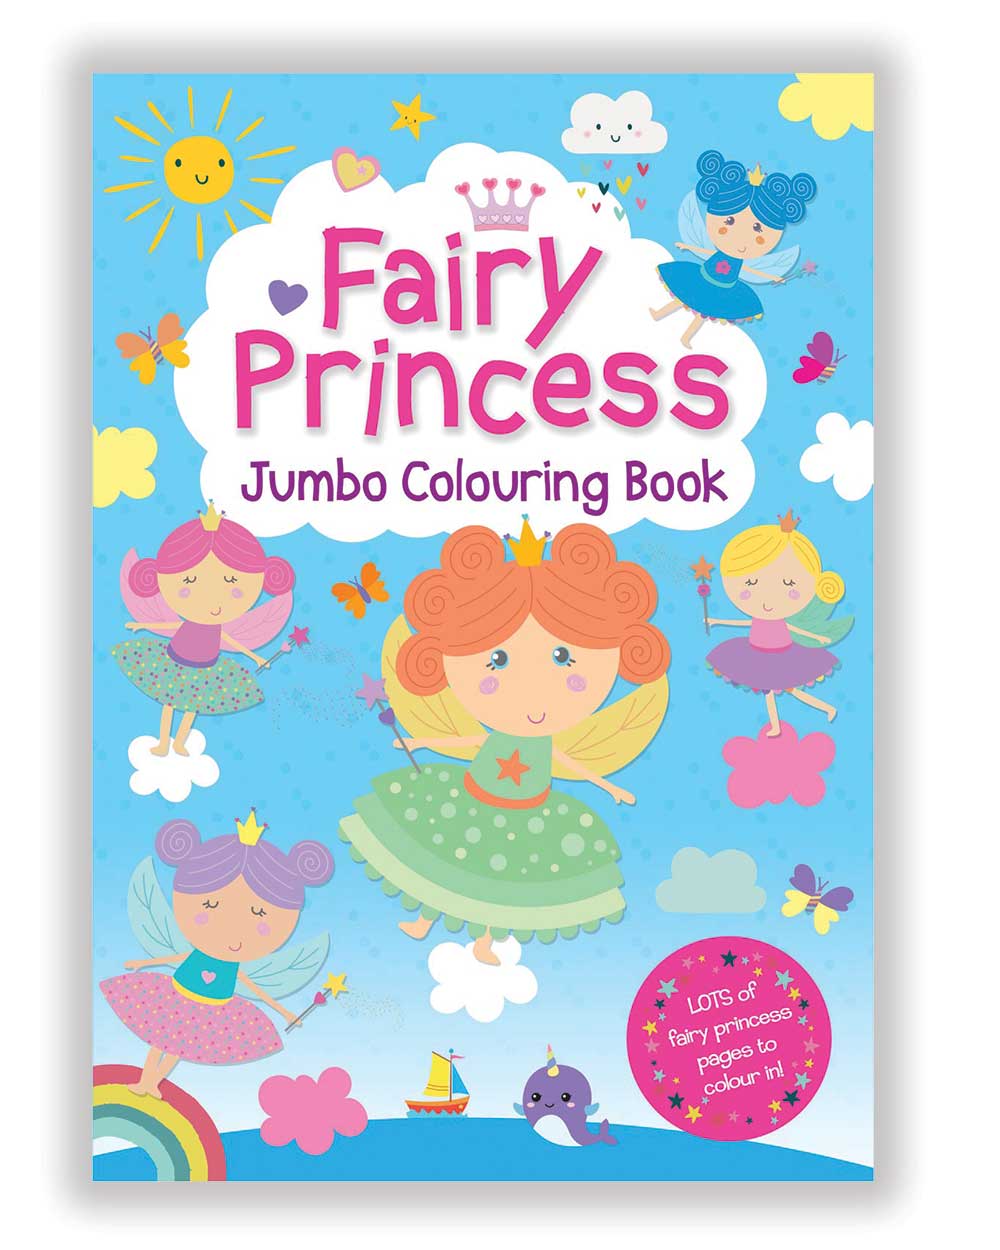 Fairy princess colouring book jumbo kids girls cute front cover on a white back ground